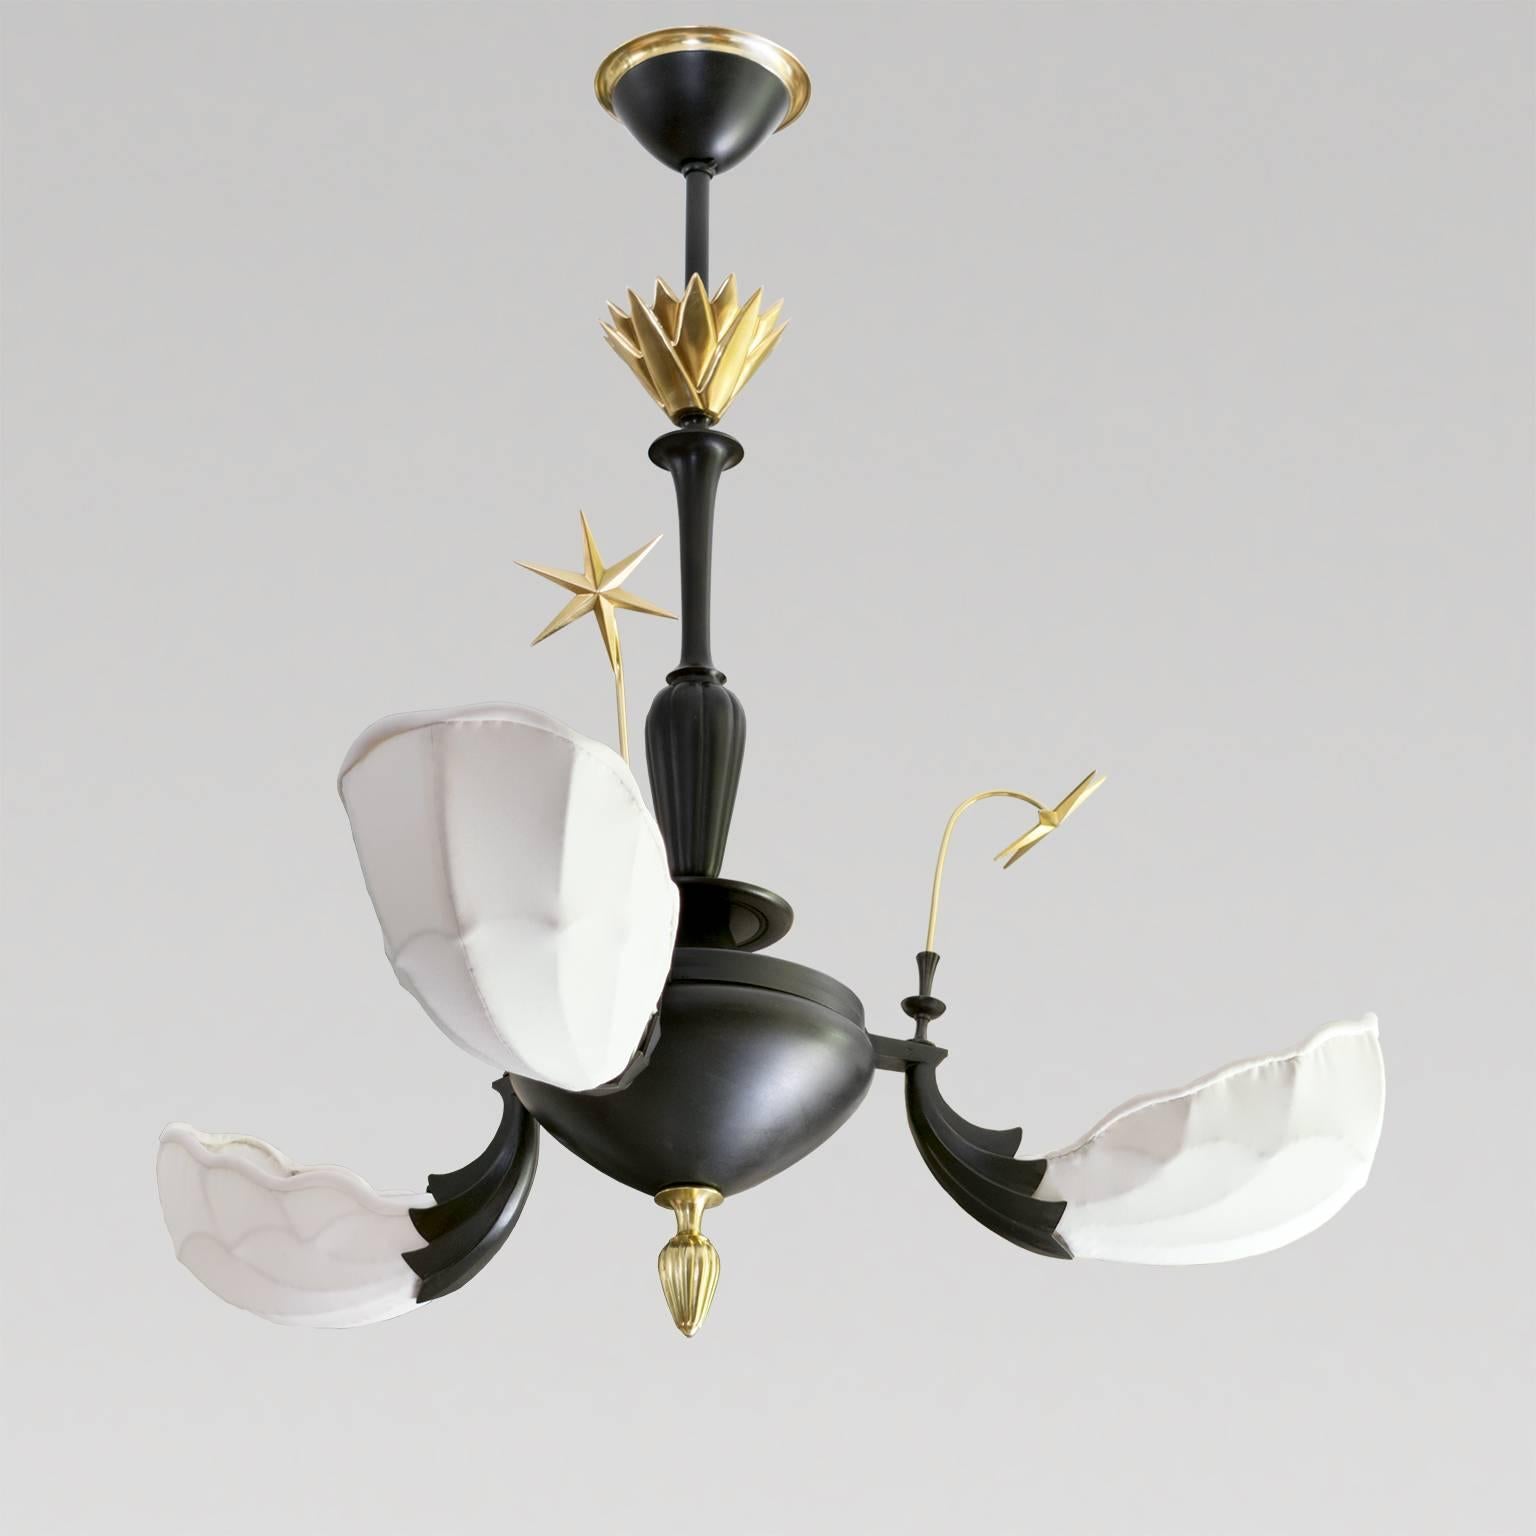 20th Century Scandinavian Modern, Art Deco Patinated and Polished Brass Three-Arm Chandelier